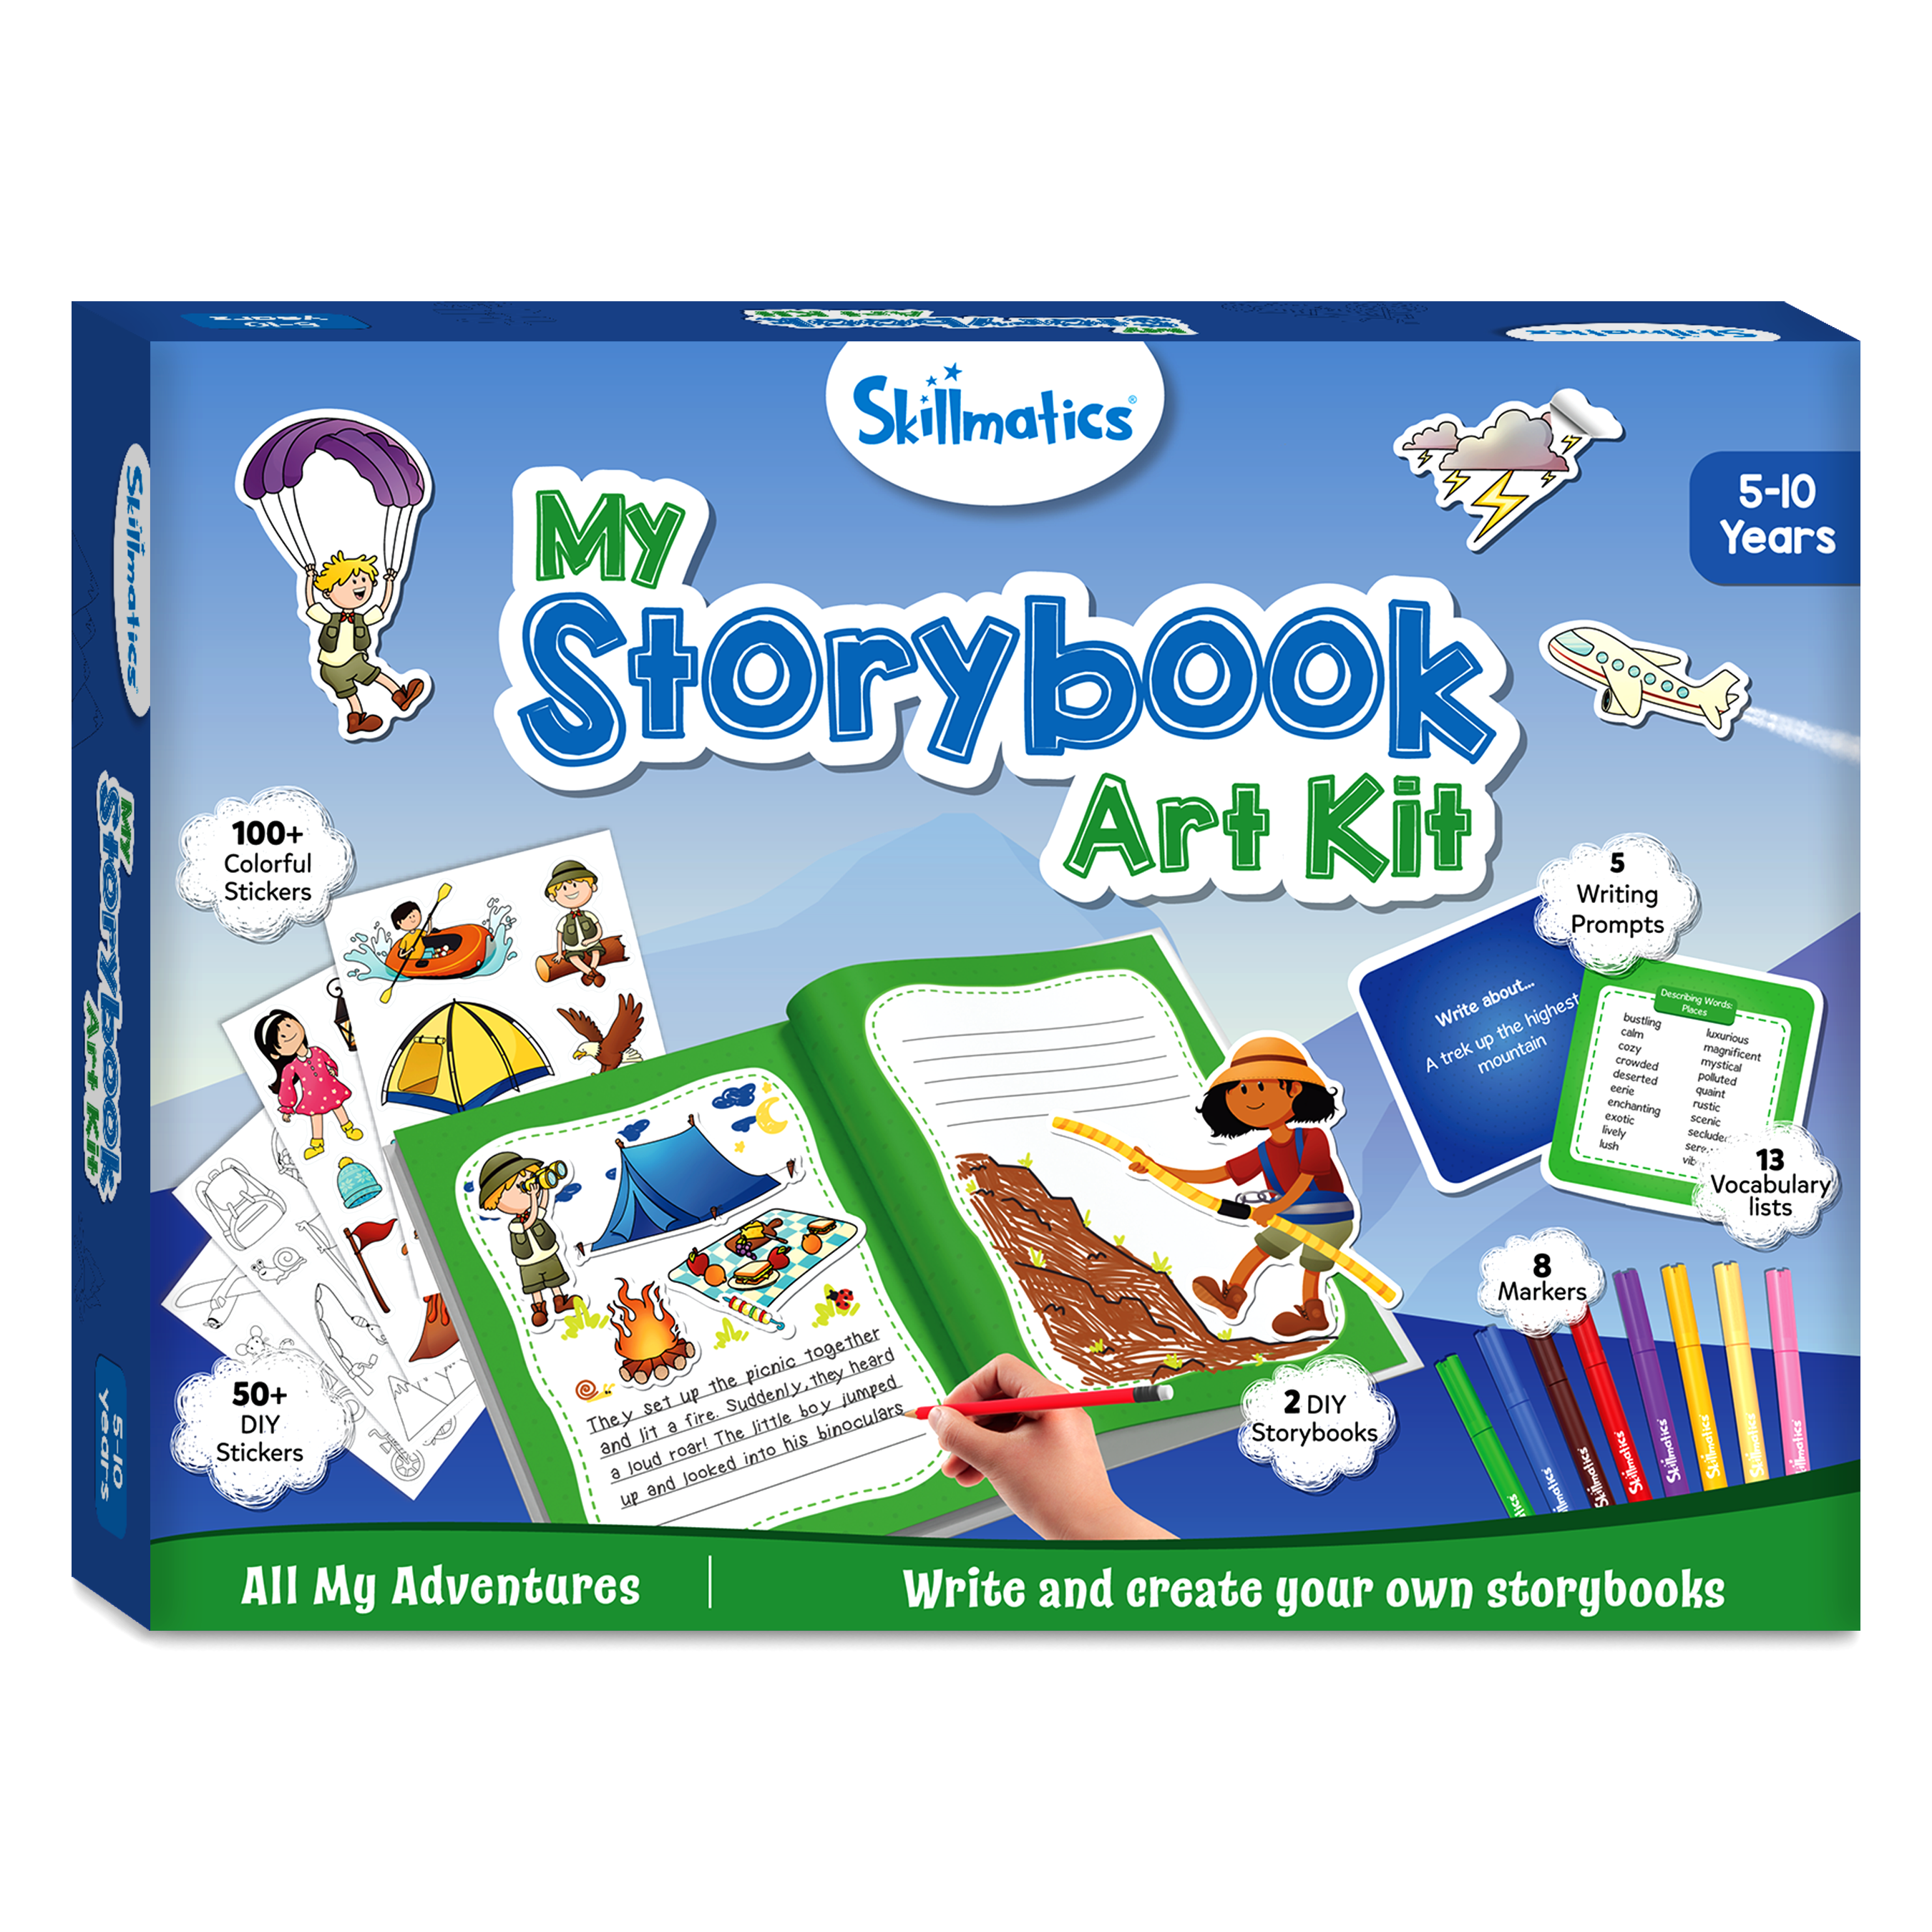 Skillmatics Storybook Art Kit - All My Adventures Art Kit for Kids, Write & Create Storybooks, Creative Activity for Boys & Girls, DIY Kit, 150+ Stickers, Gifts for Ages 5, 6, 7, 8, 9, 10